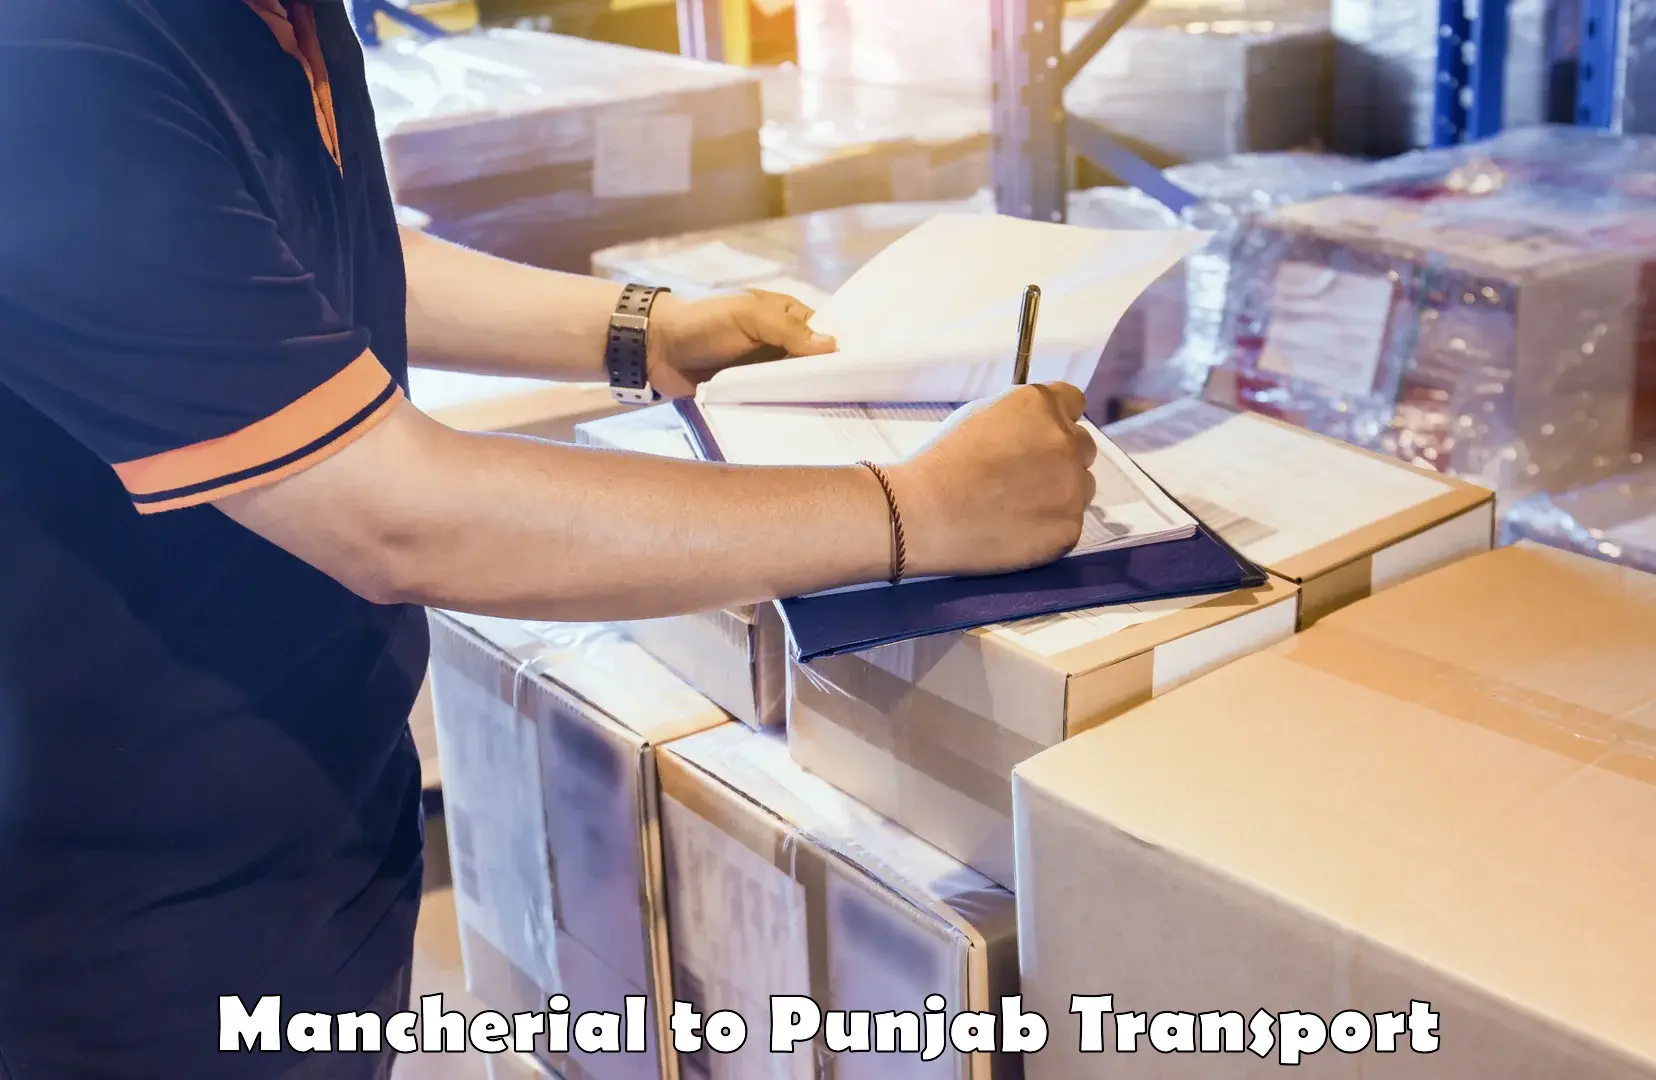 Cargo train transport services Mancherial to Punjab